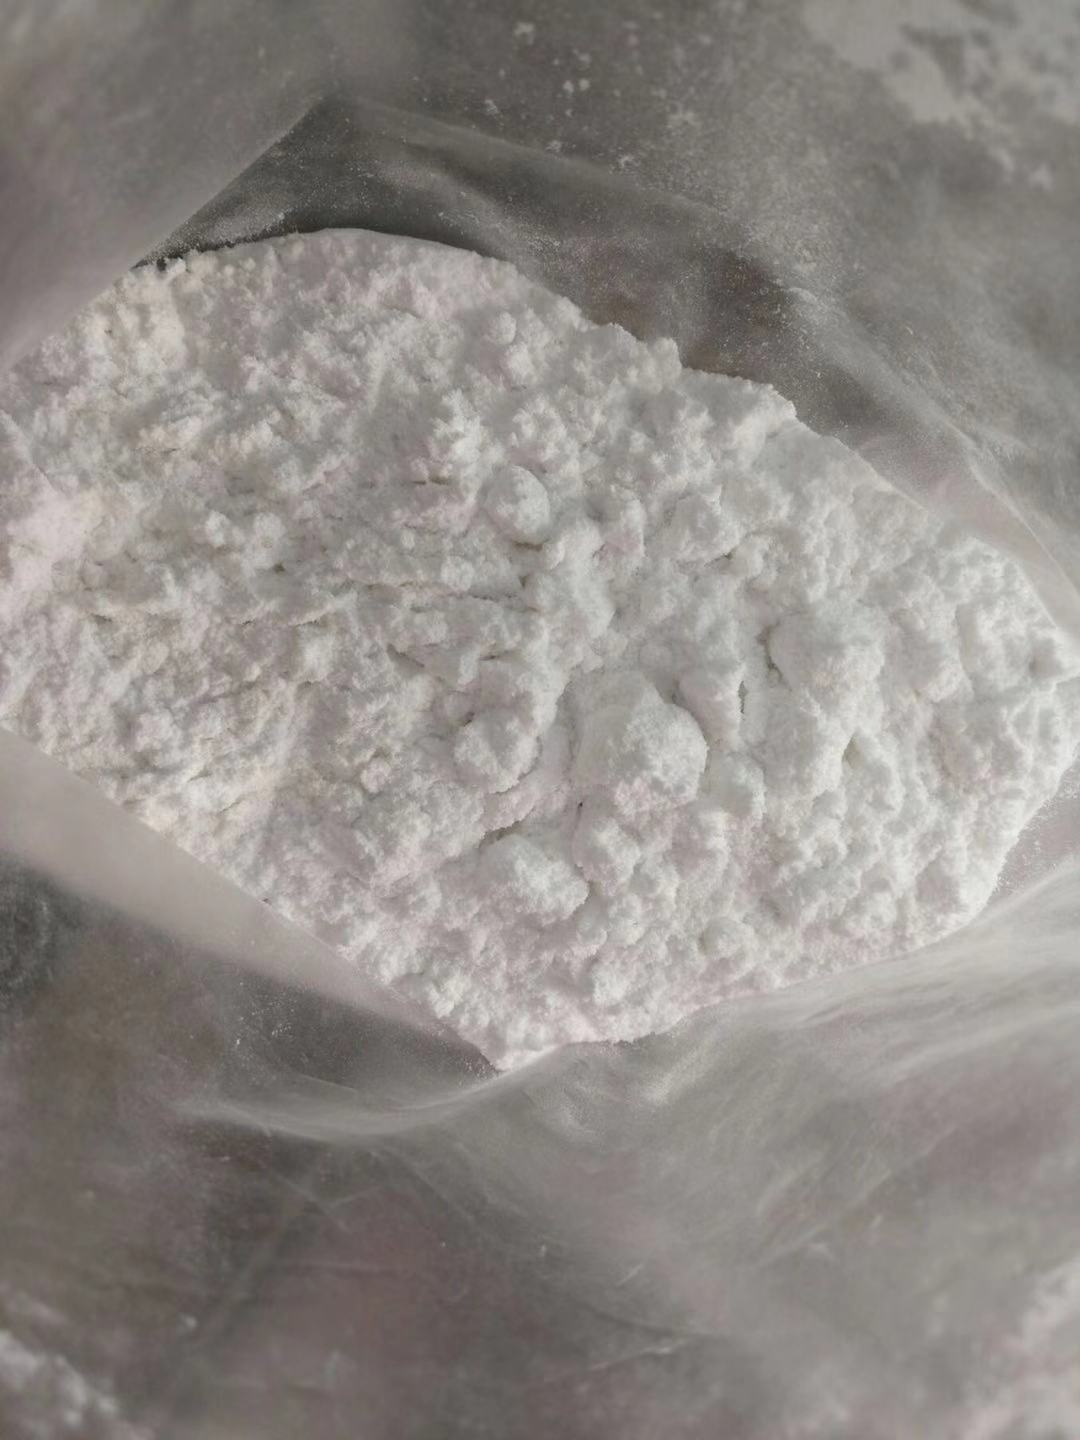 Supply High Purity Isotretinoin CAS 4759-48-2 Isotretinoin Powder Isotretinoin Pharmaceutical Raw Materials